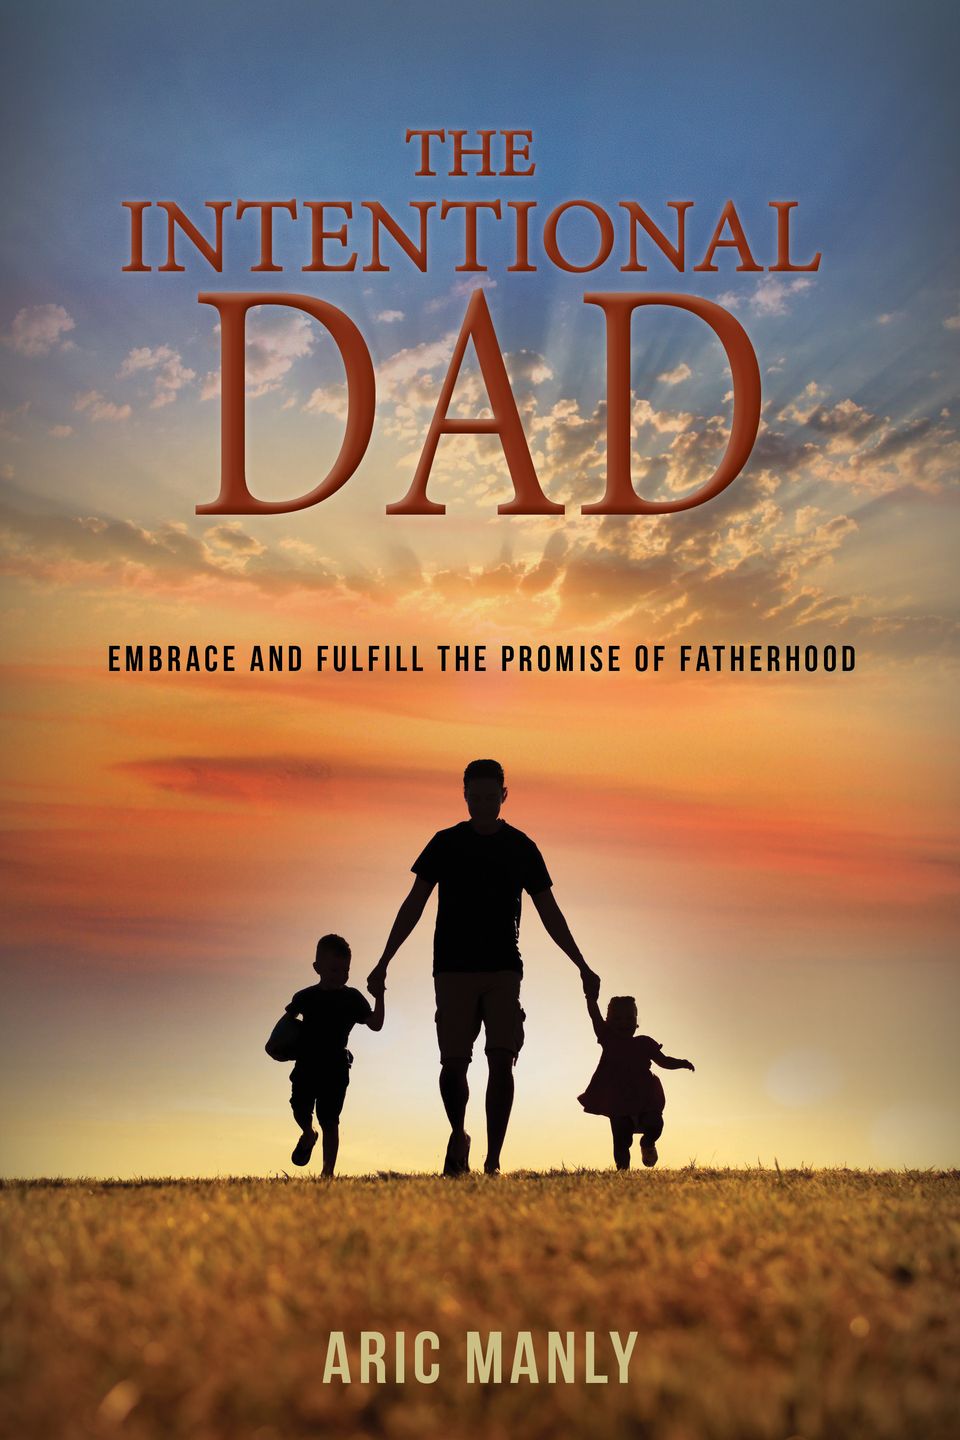 The Intentional Dad: Embrace and Fulfill The Promise of Fatherhood